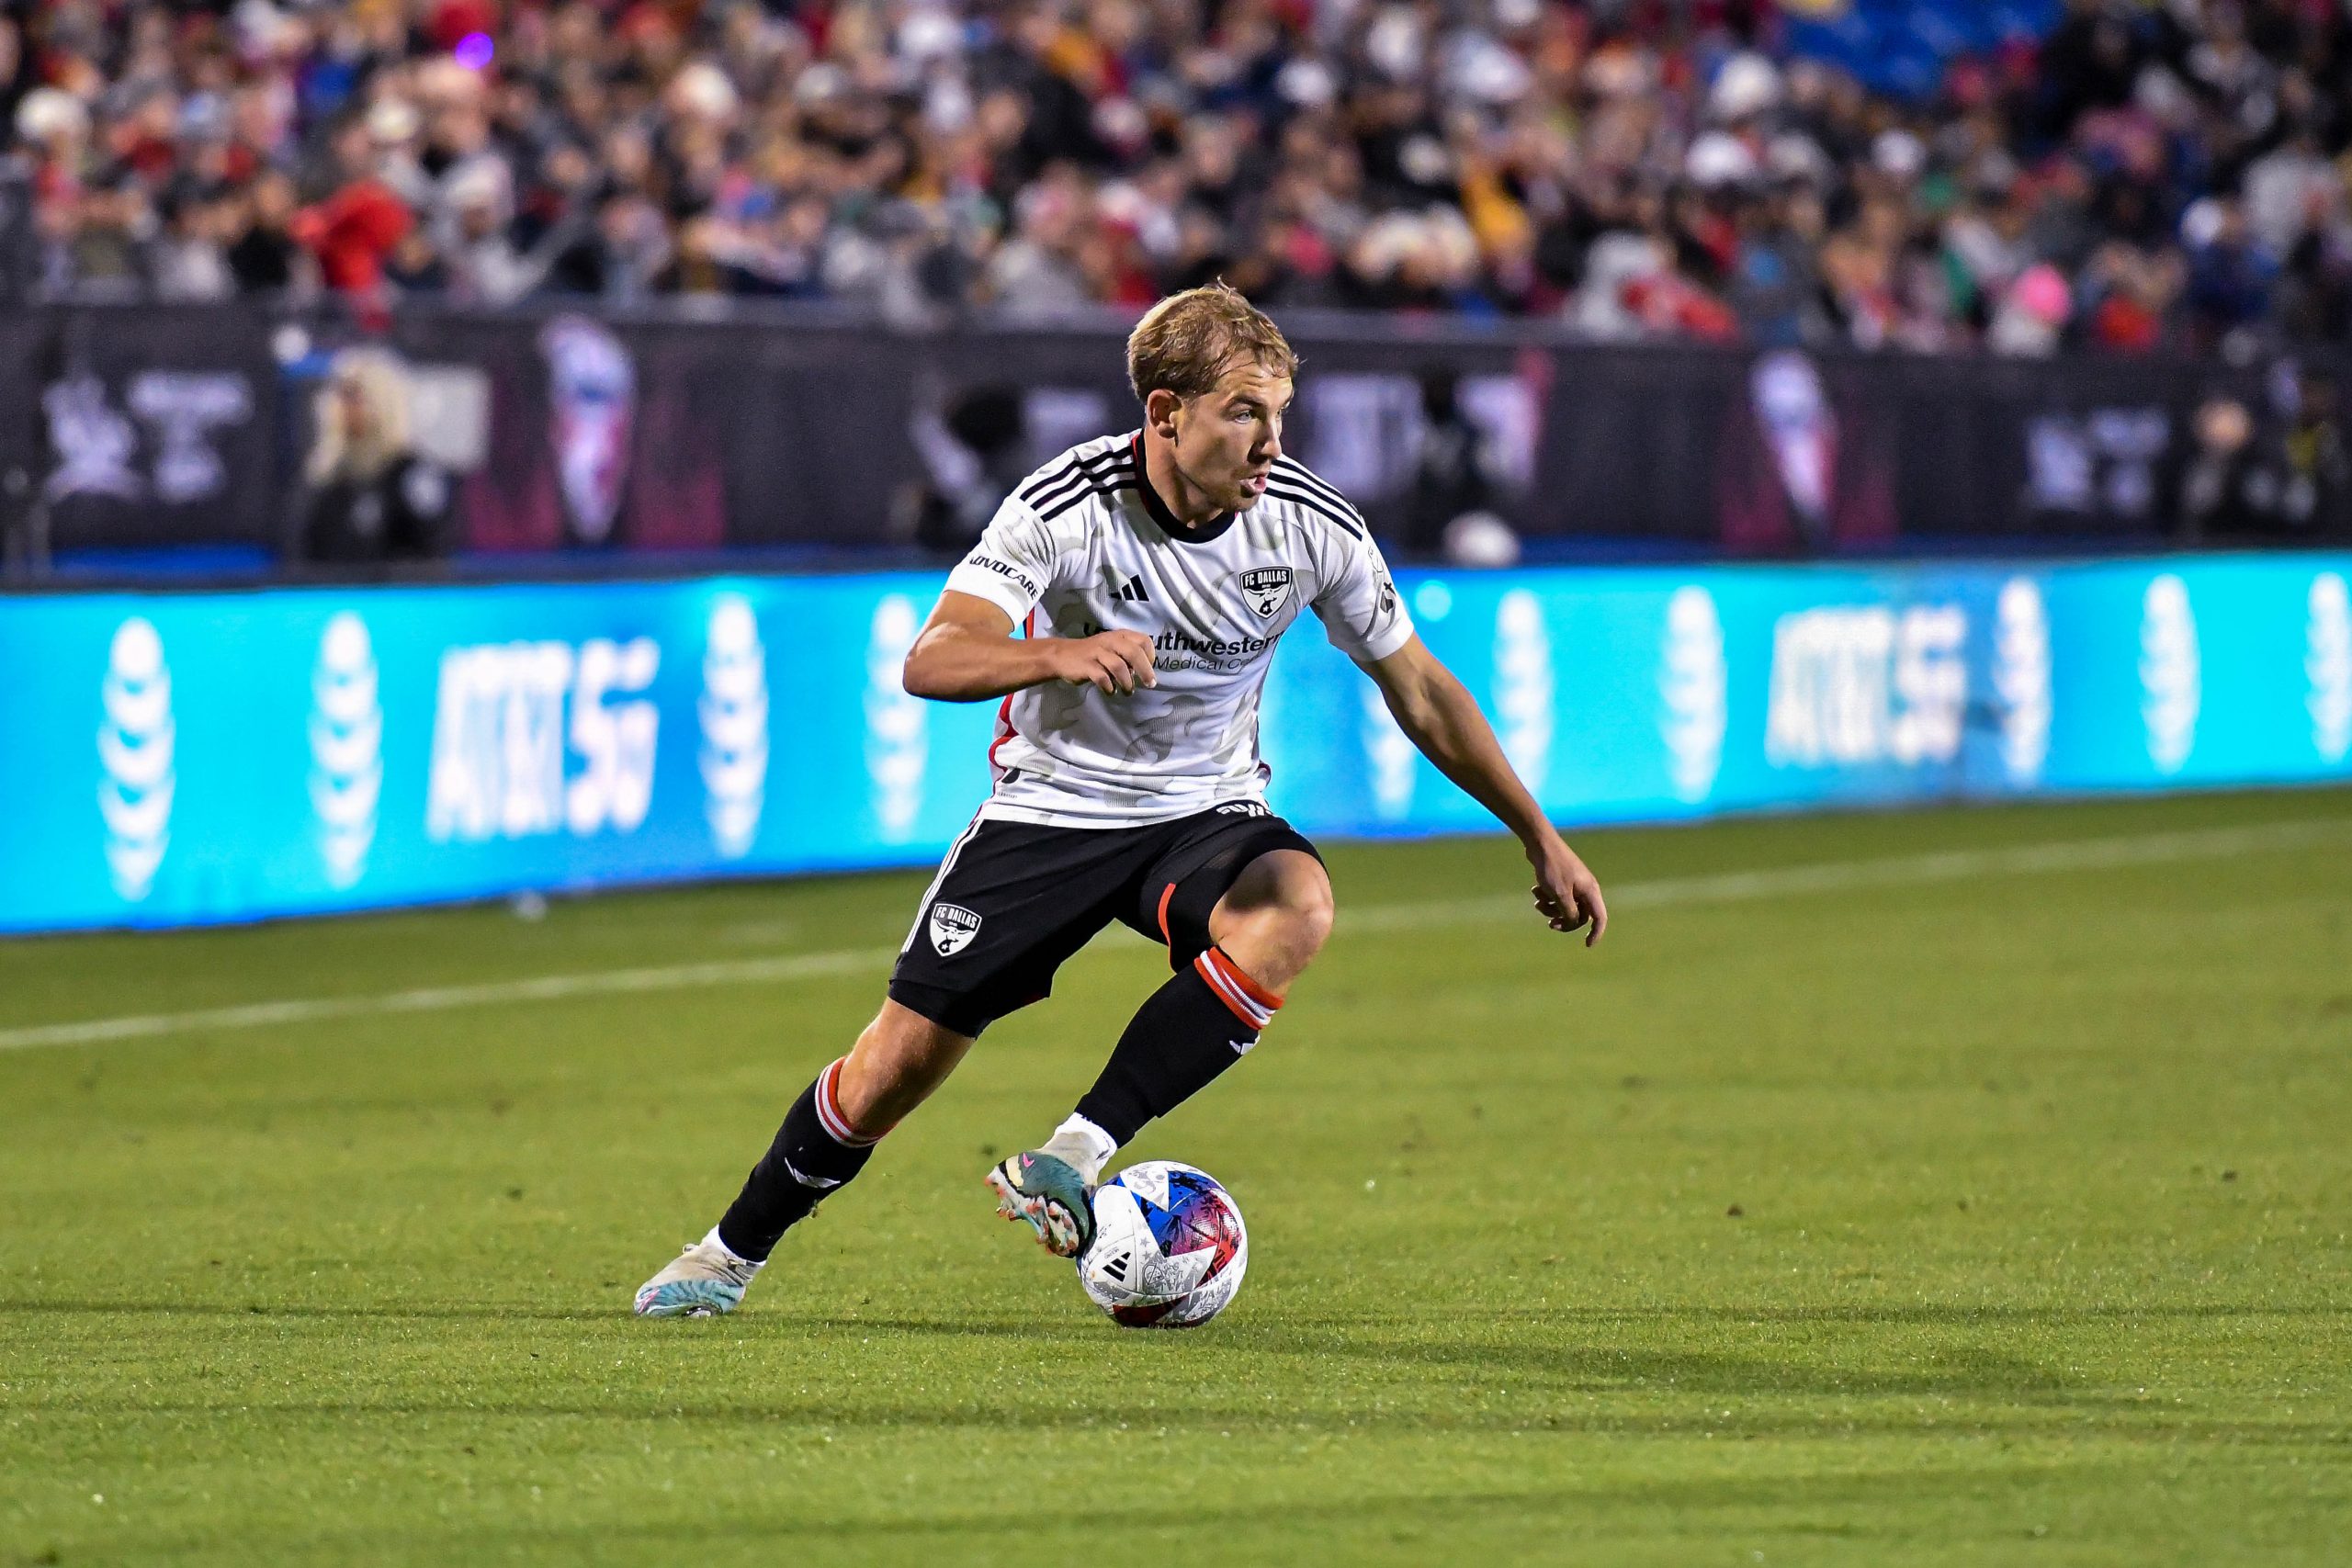 Paxton Pomykal cuts inside in the MLS match against Sporting KC on Saturday, March 18, 2023, at Toyota Stadium. (Daniel McCullough, 3rd Degree)